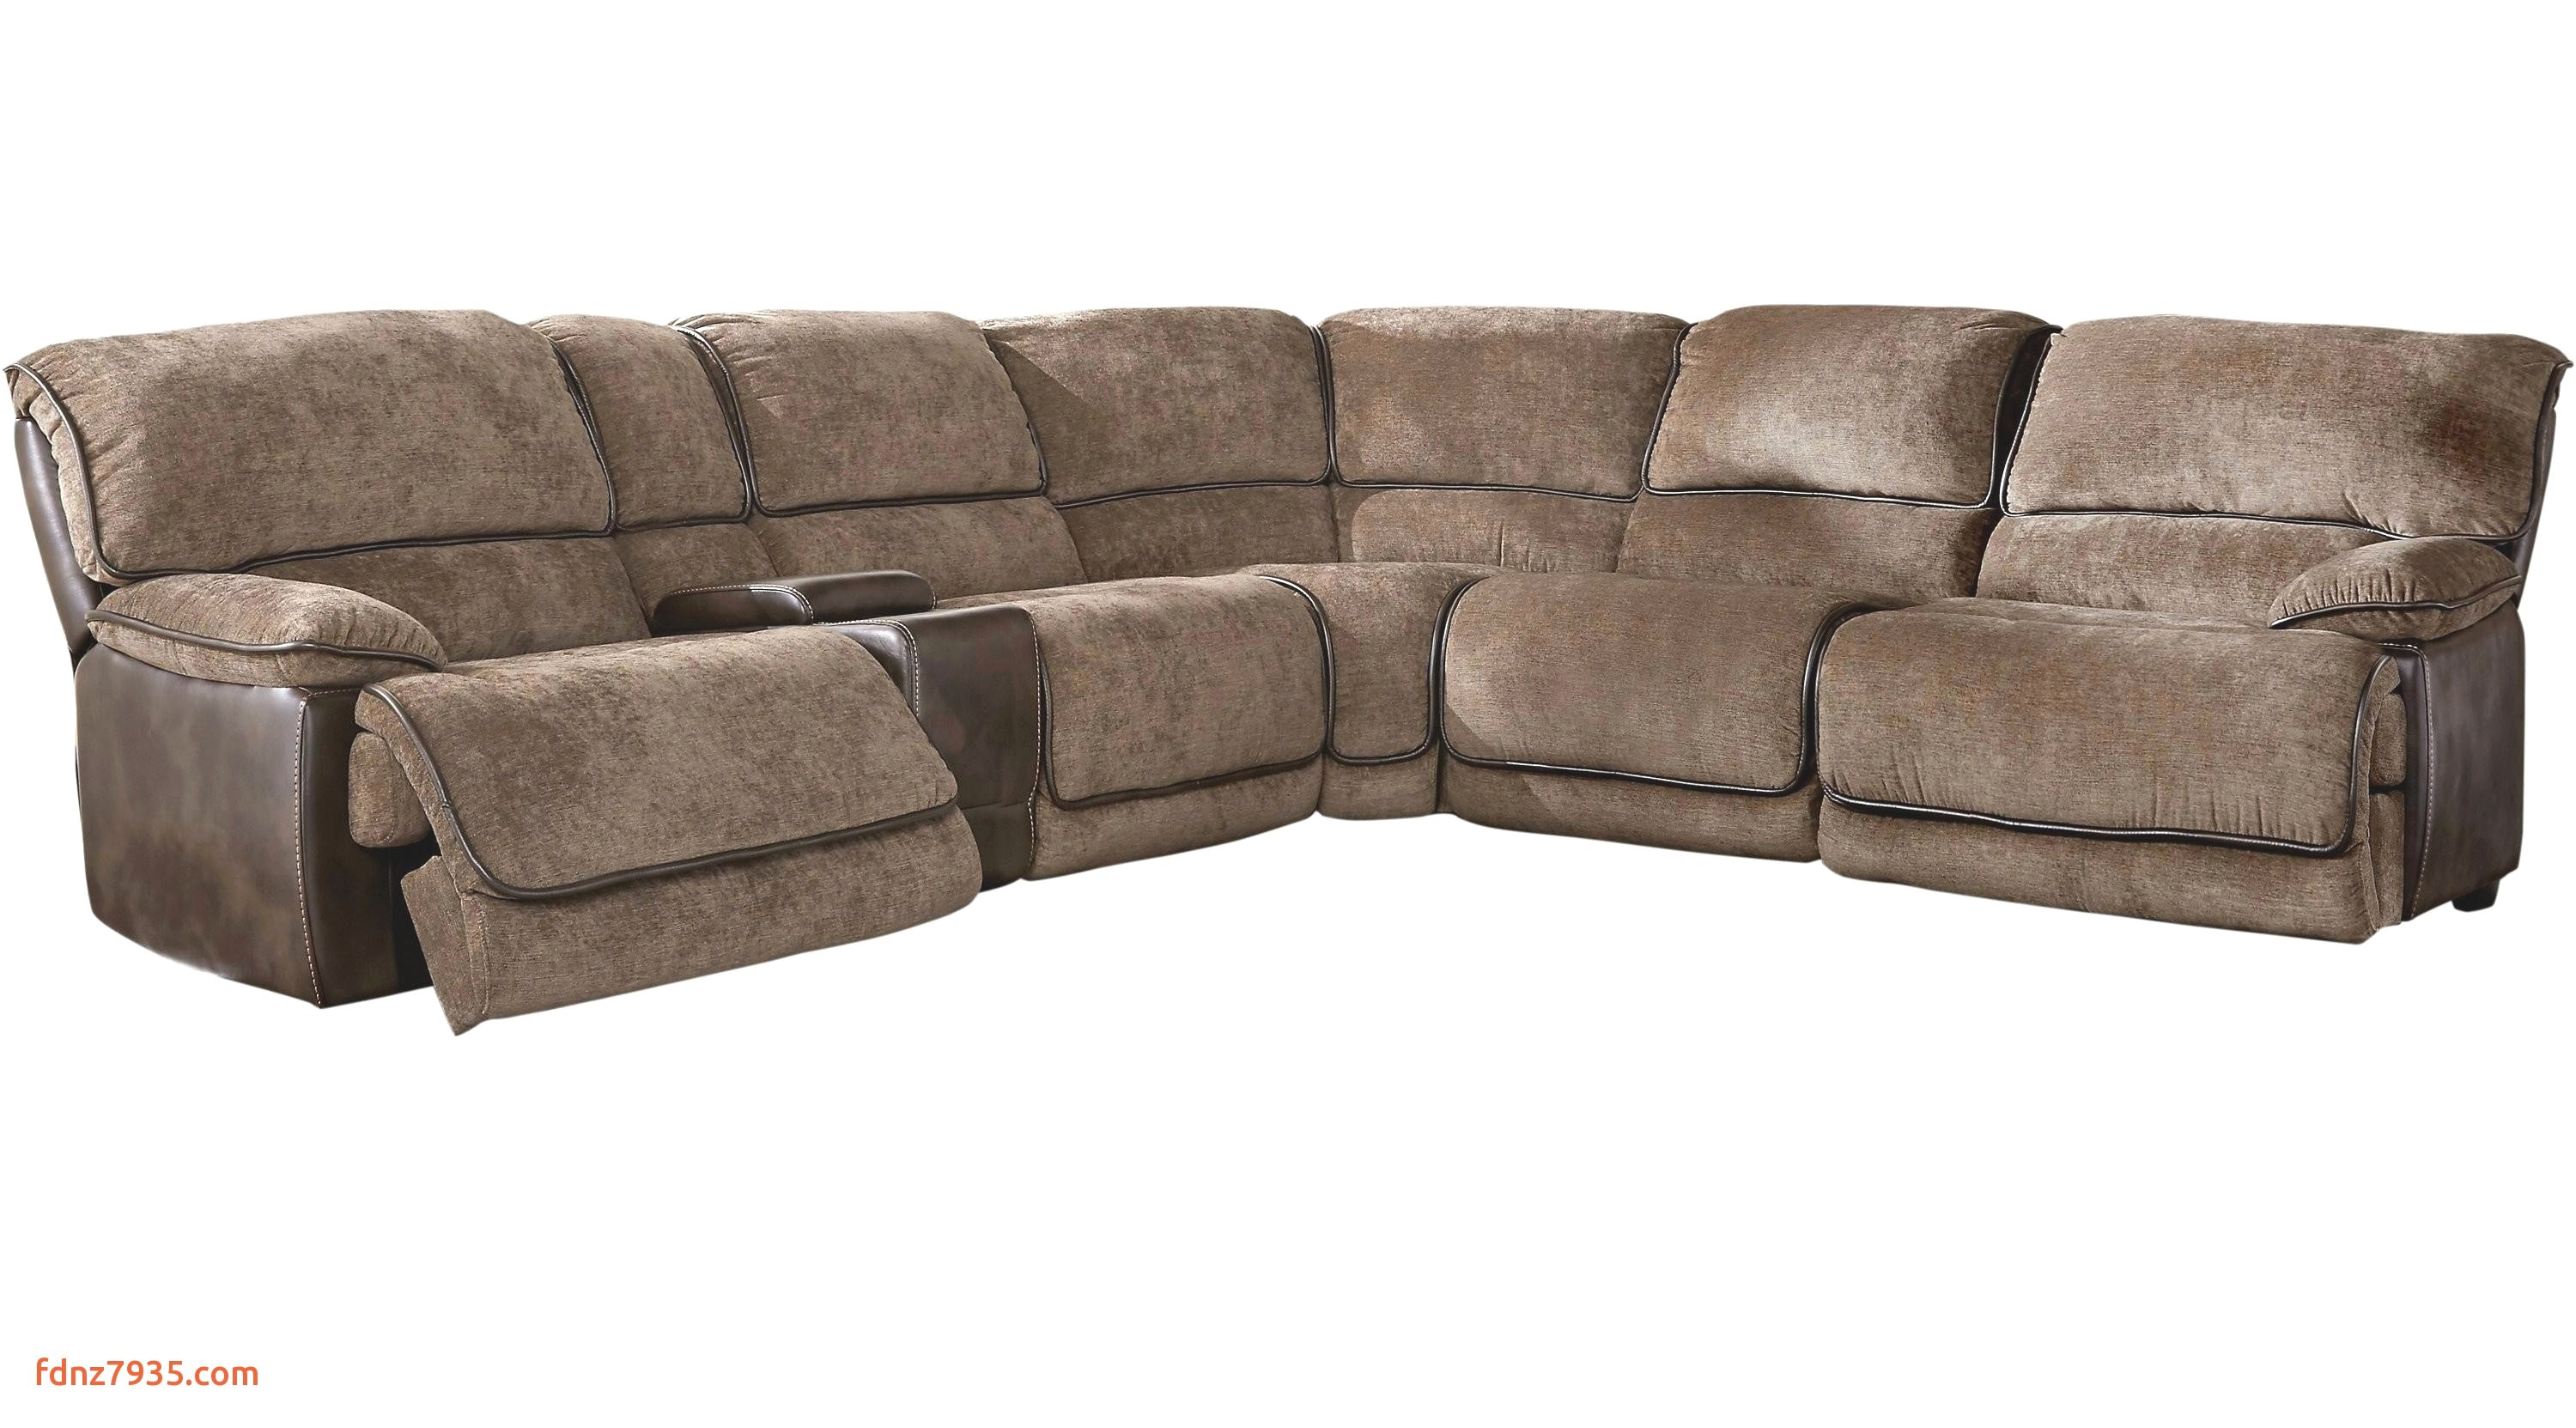 costco sectional couches unique slipcover sectional sofa luxury couch cover new sectional couch 0d